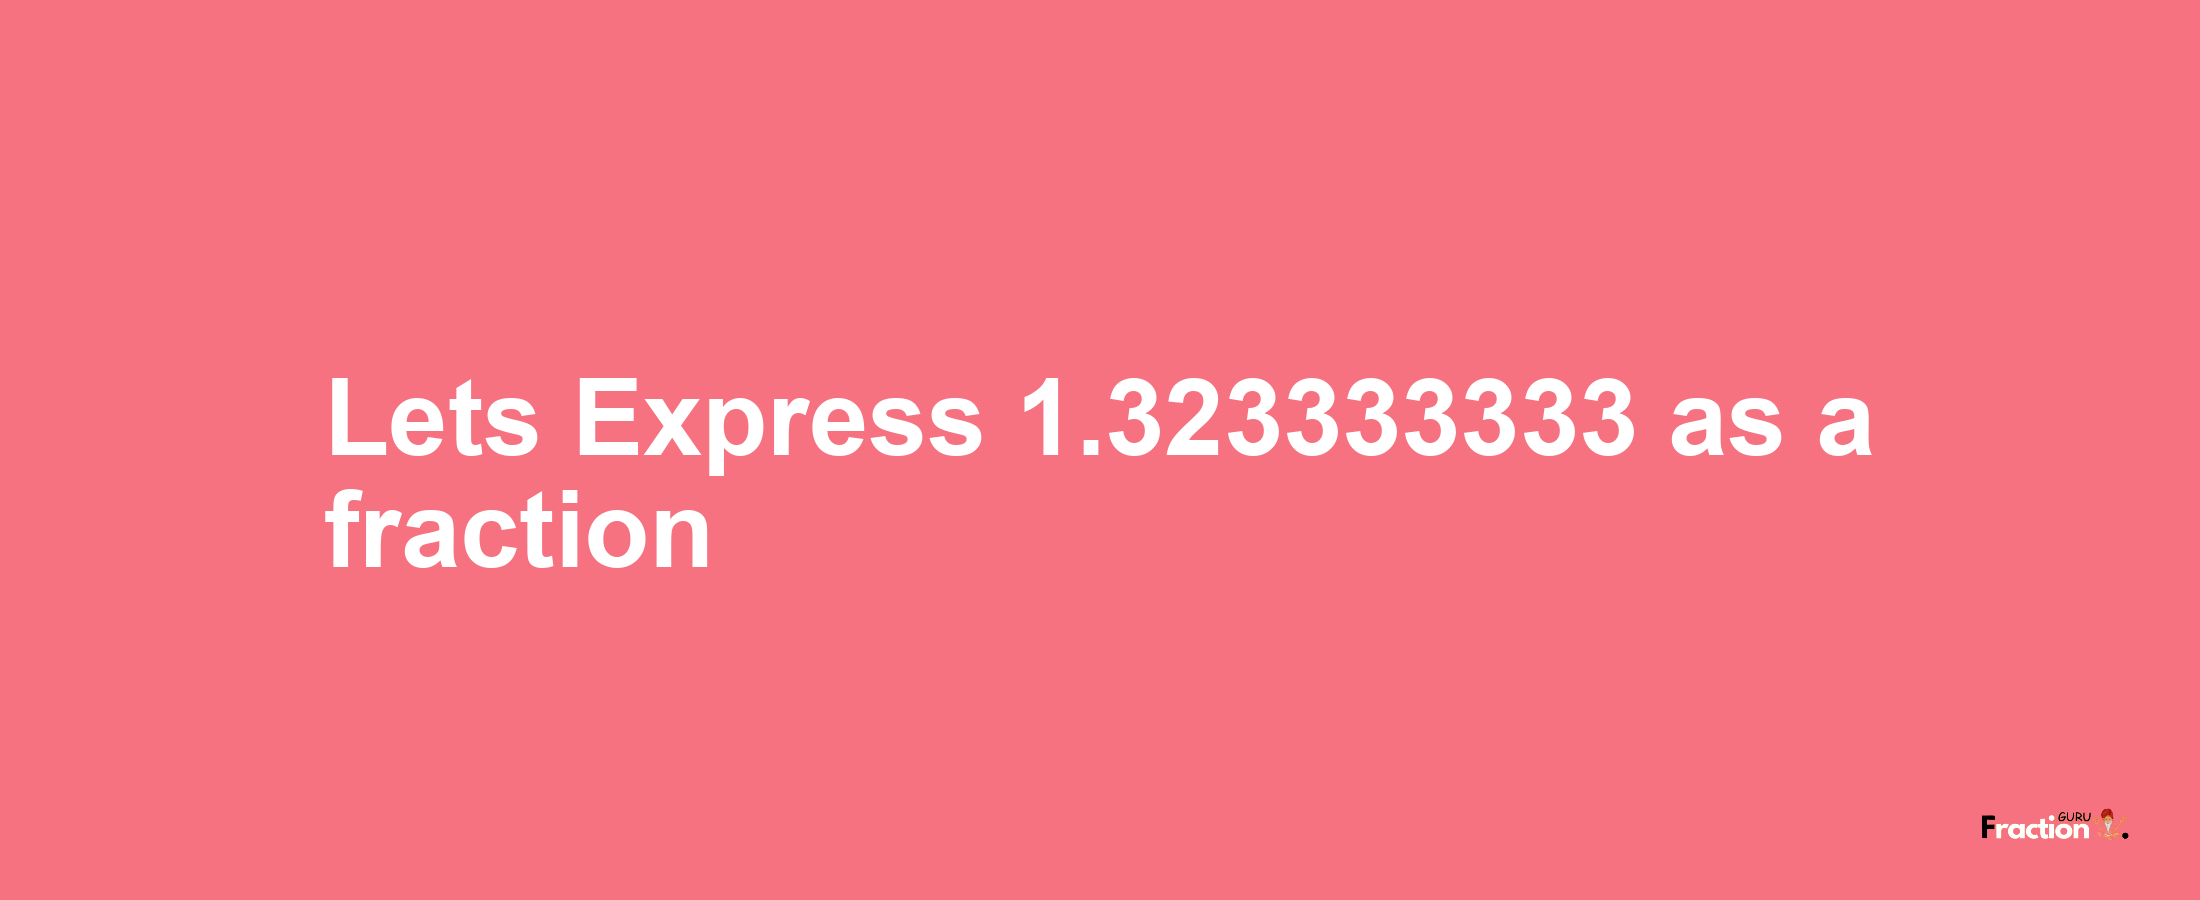 Lets Express 1.323333333 as afraction